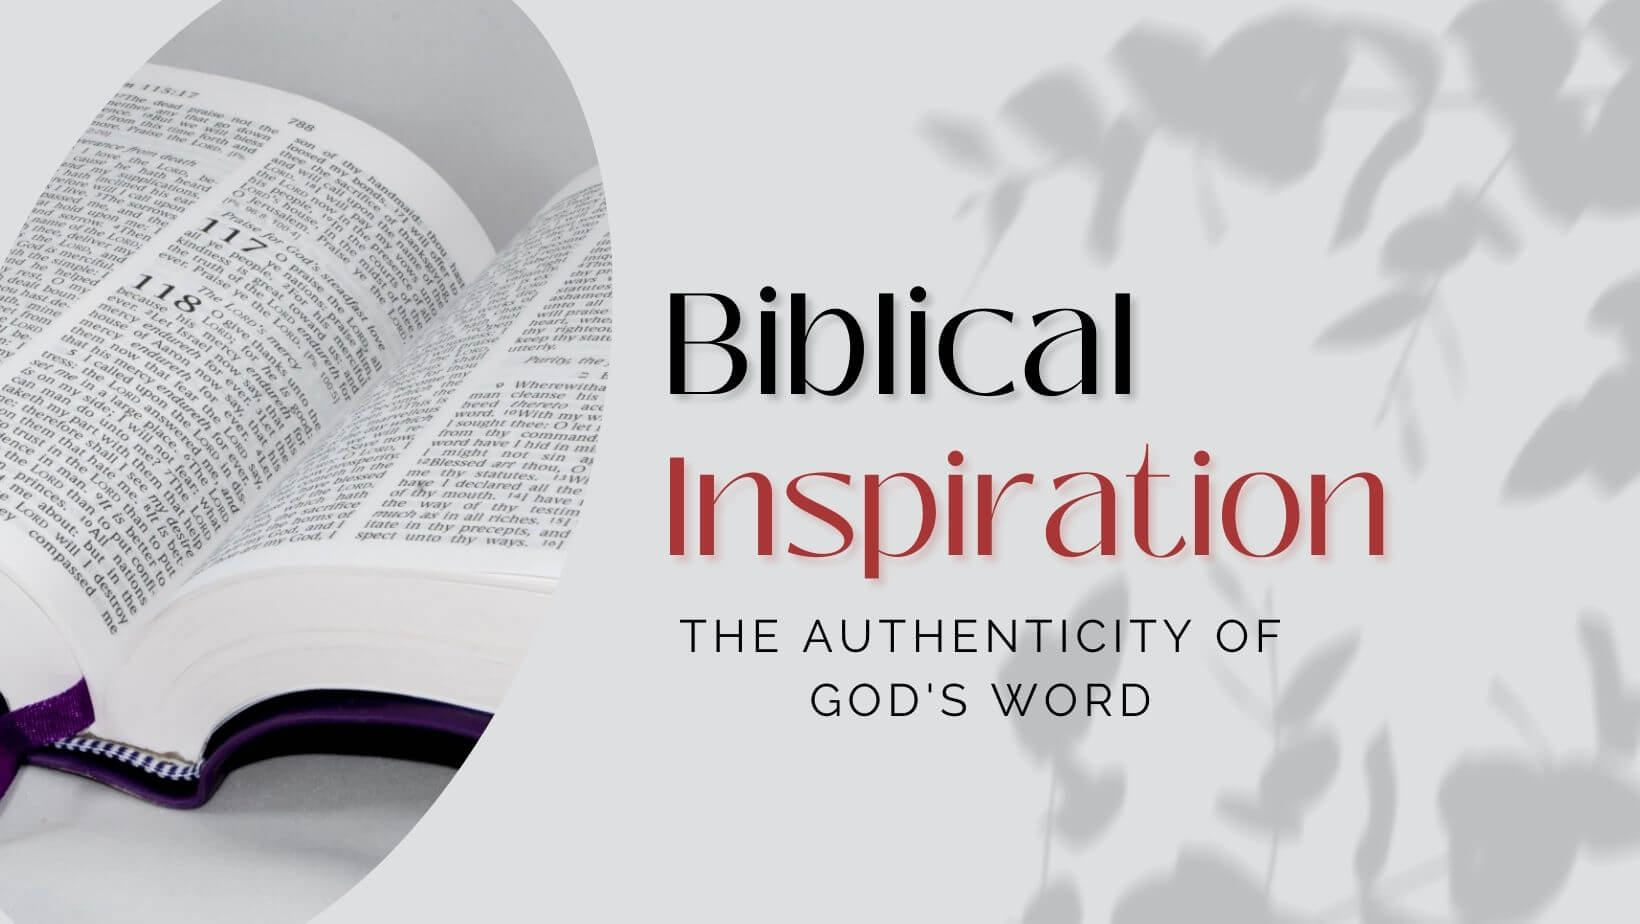 Biblical inspiration - the Authenticity of God's word